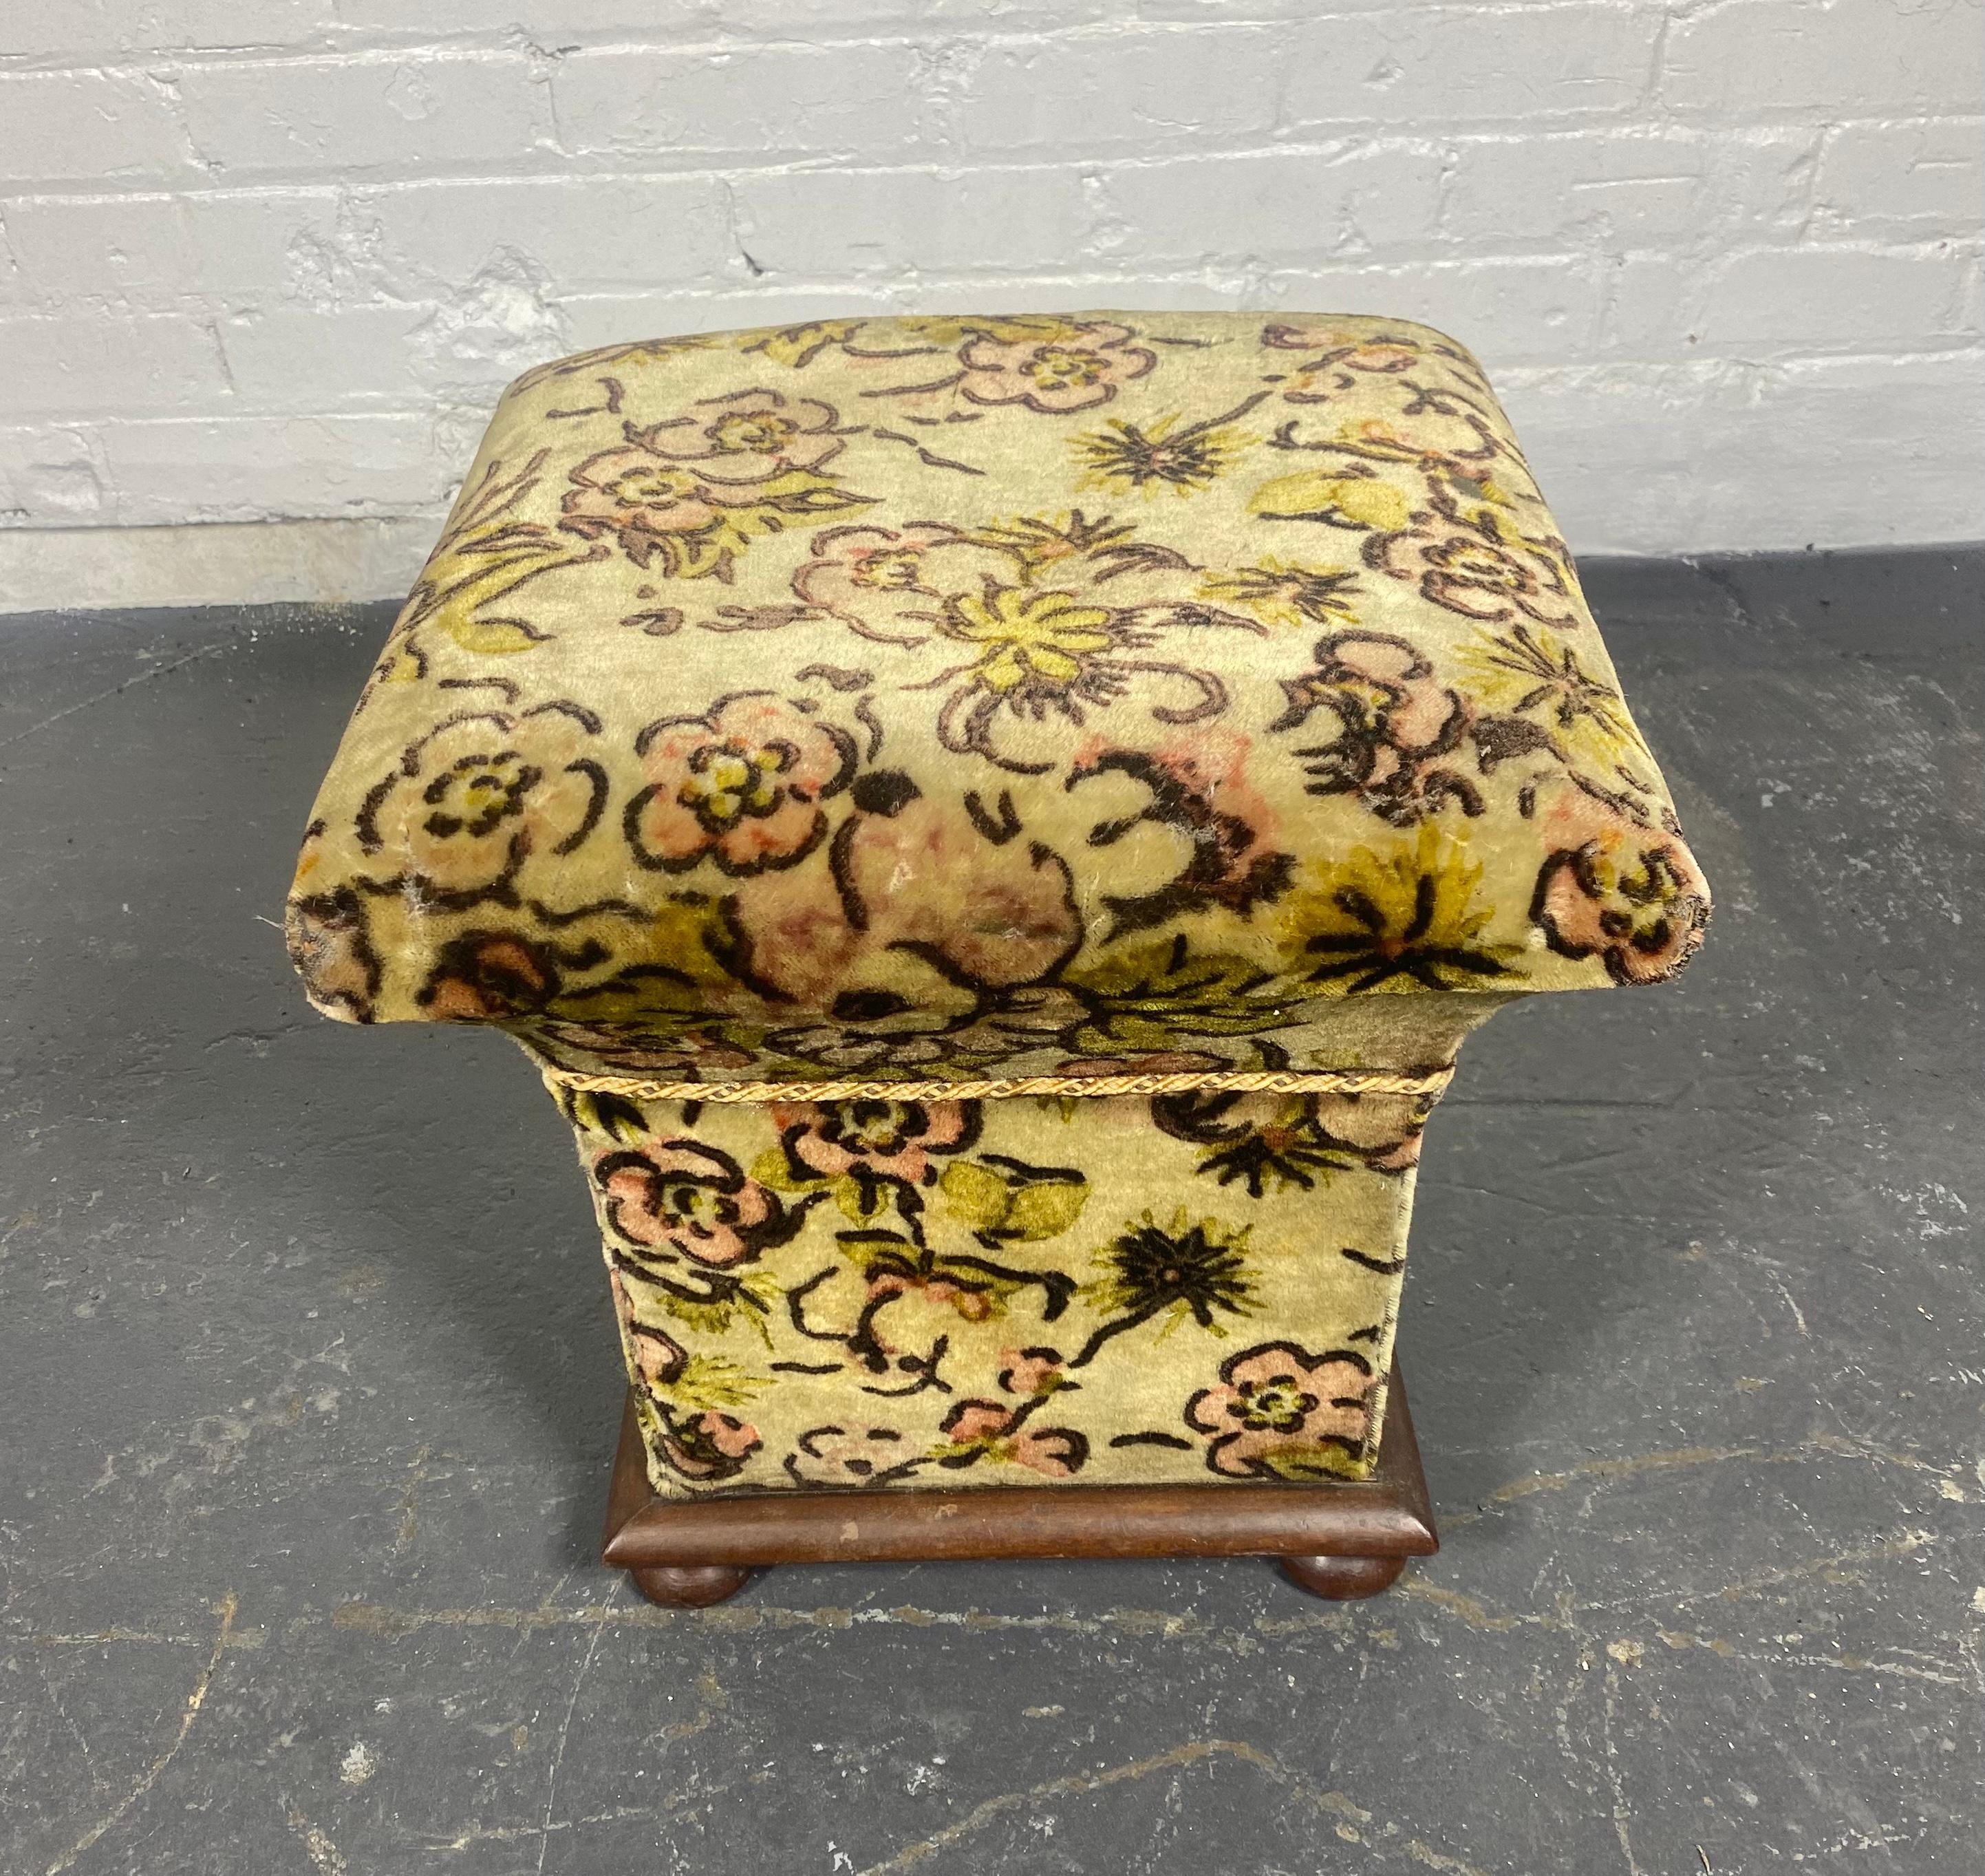 Unusual 1930s Art Deco Wood and Mohair Ottoman / Foot Stool..Great form and proportion. Wonderful stylized cut mohair patterned upholstery,, Minor loss / wear to original fabric (see photos) Solid mahogany or walnut base,  Functional and decorative